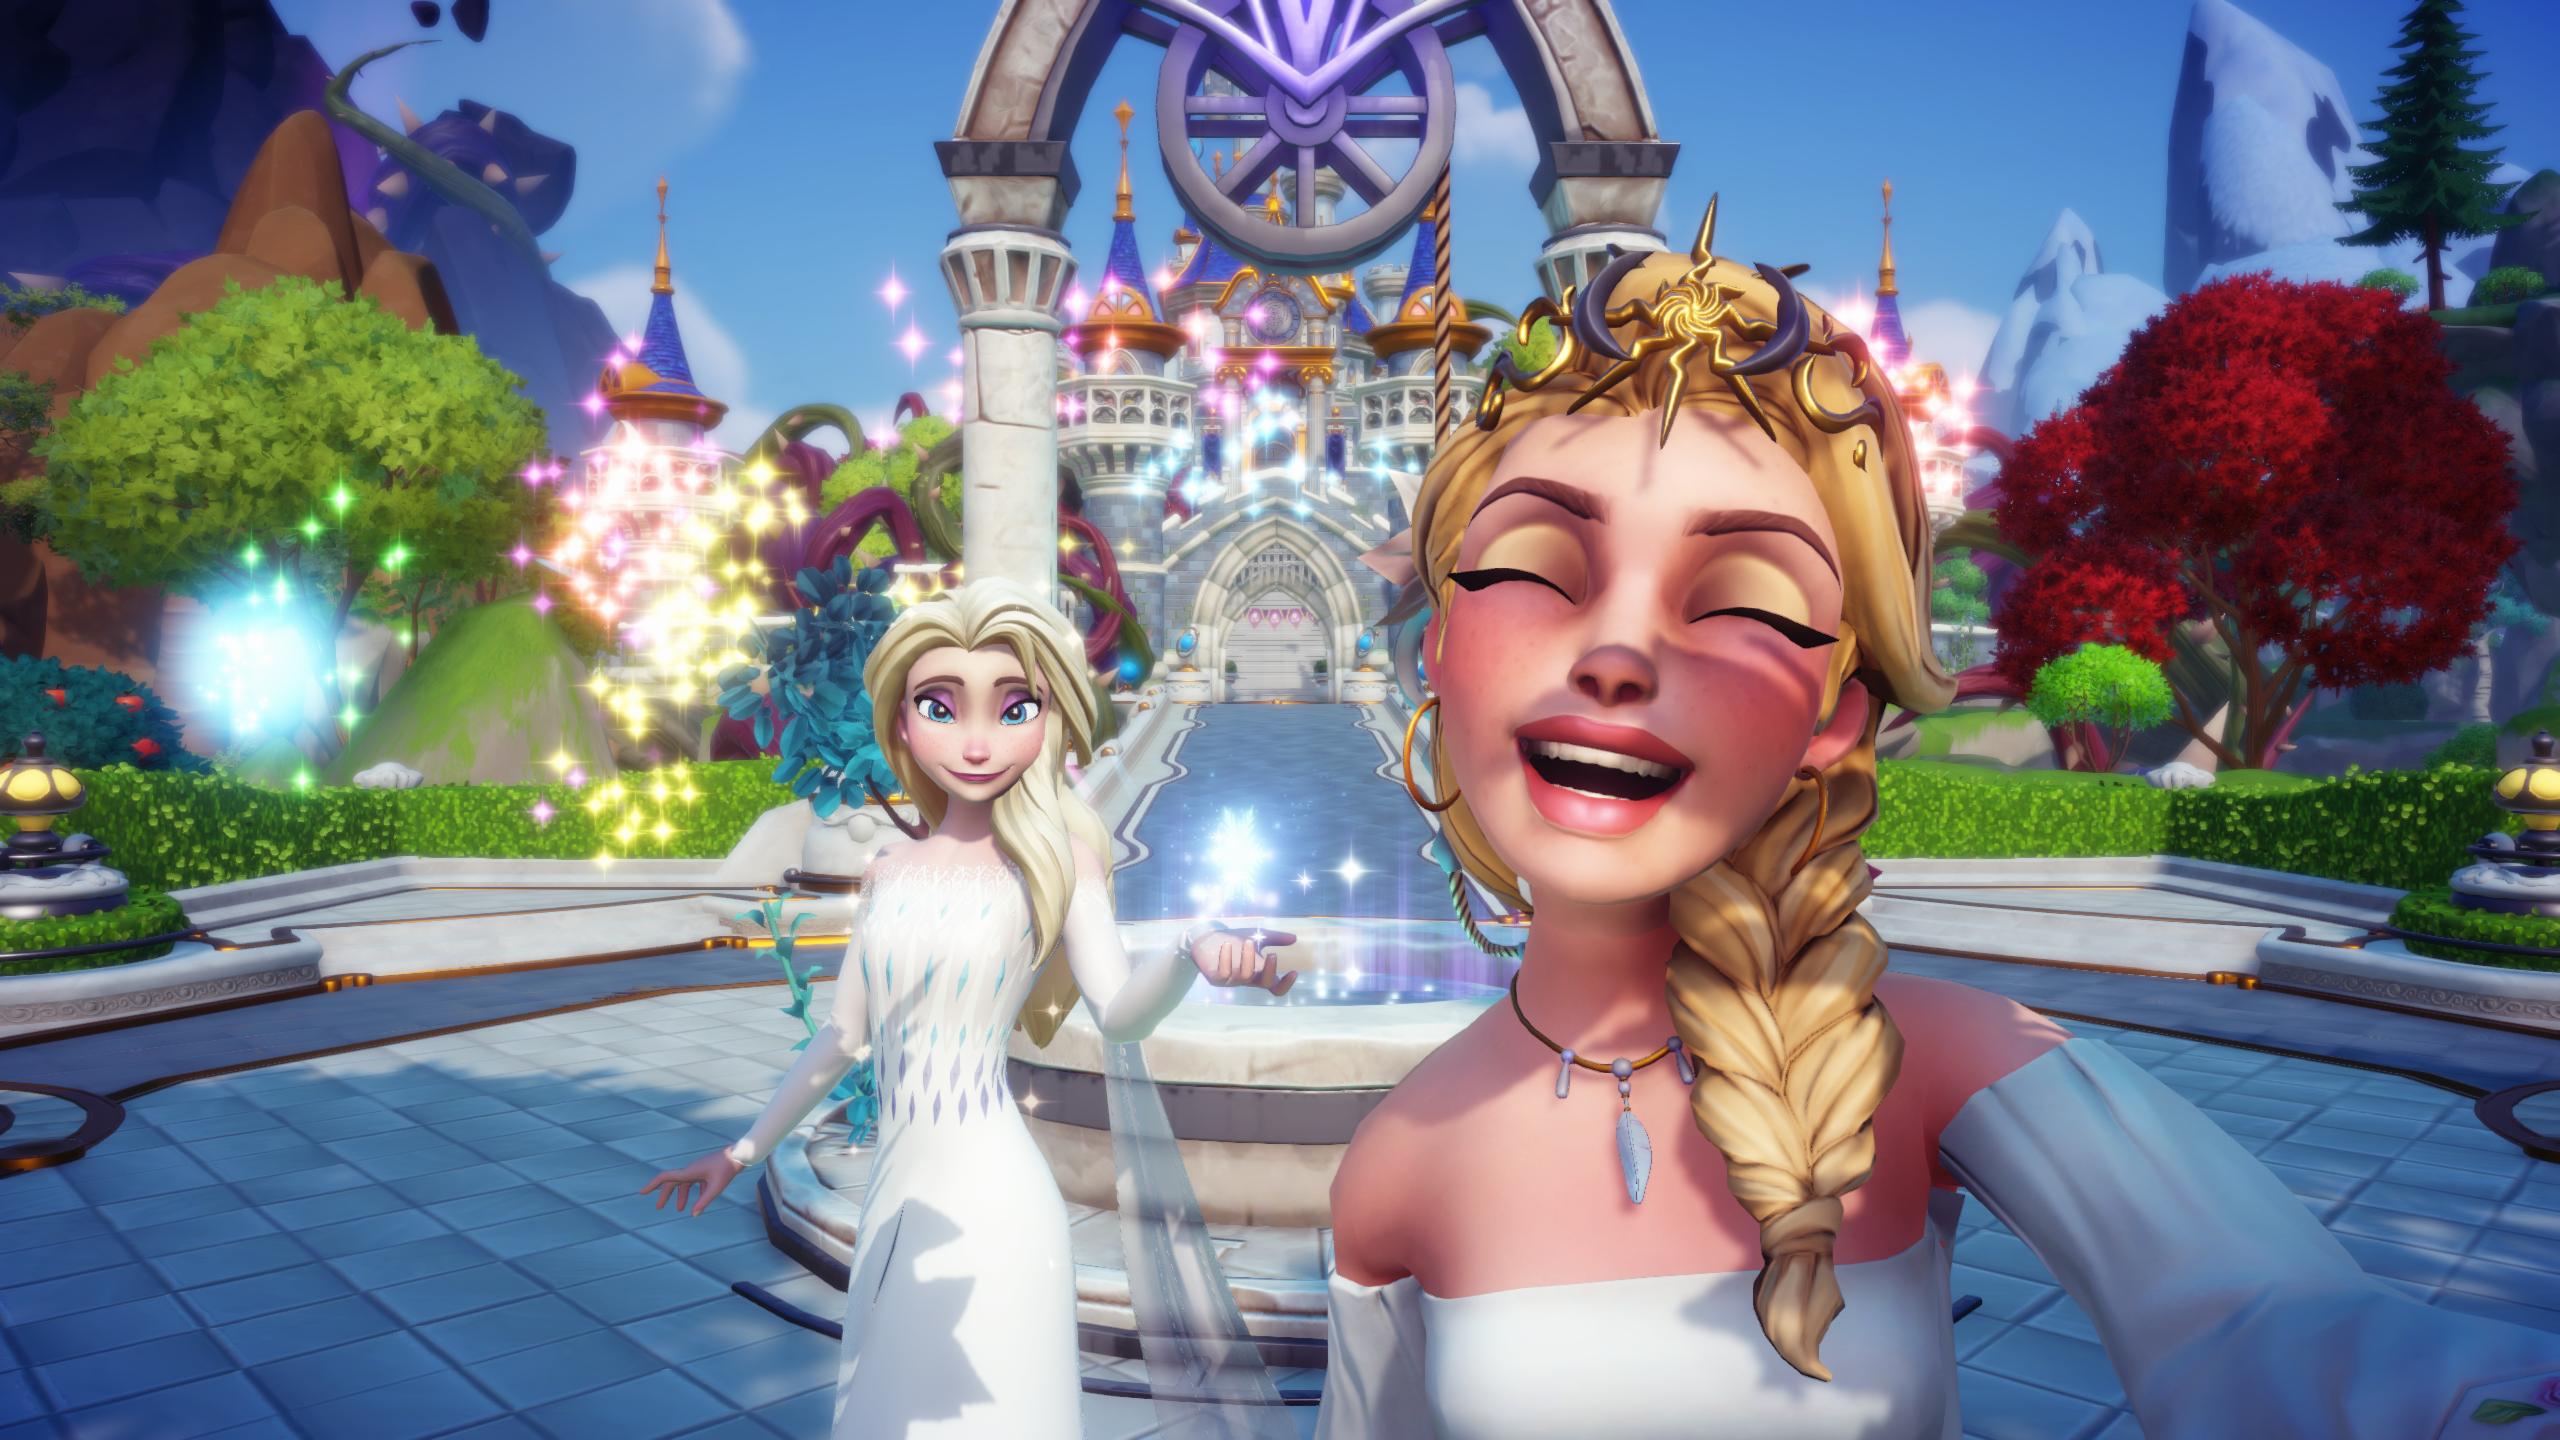 Disney Dreamlight Valley is getting multiplayer this year PC Gamer